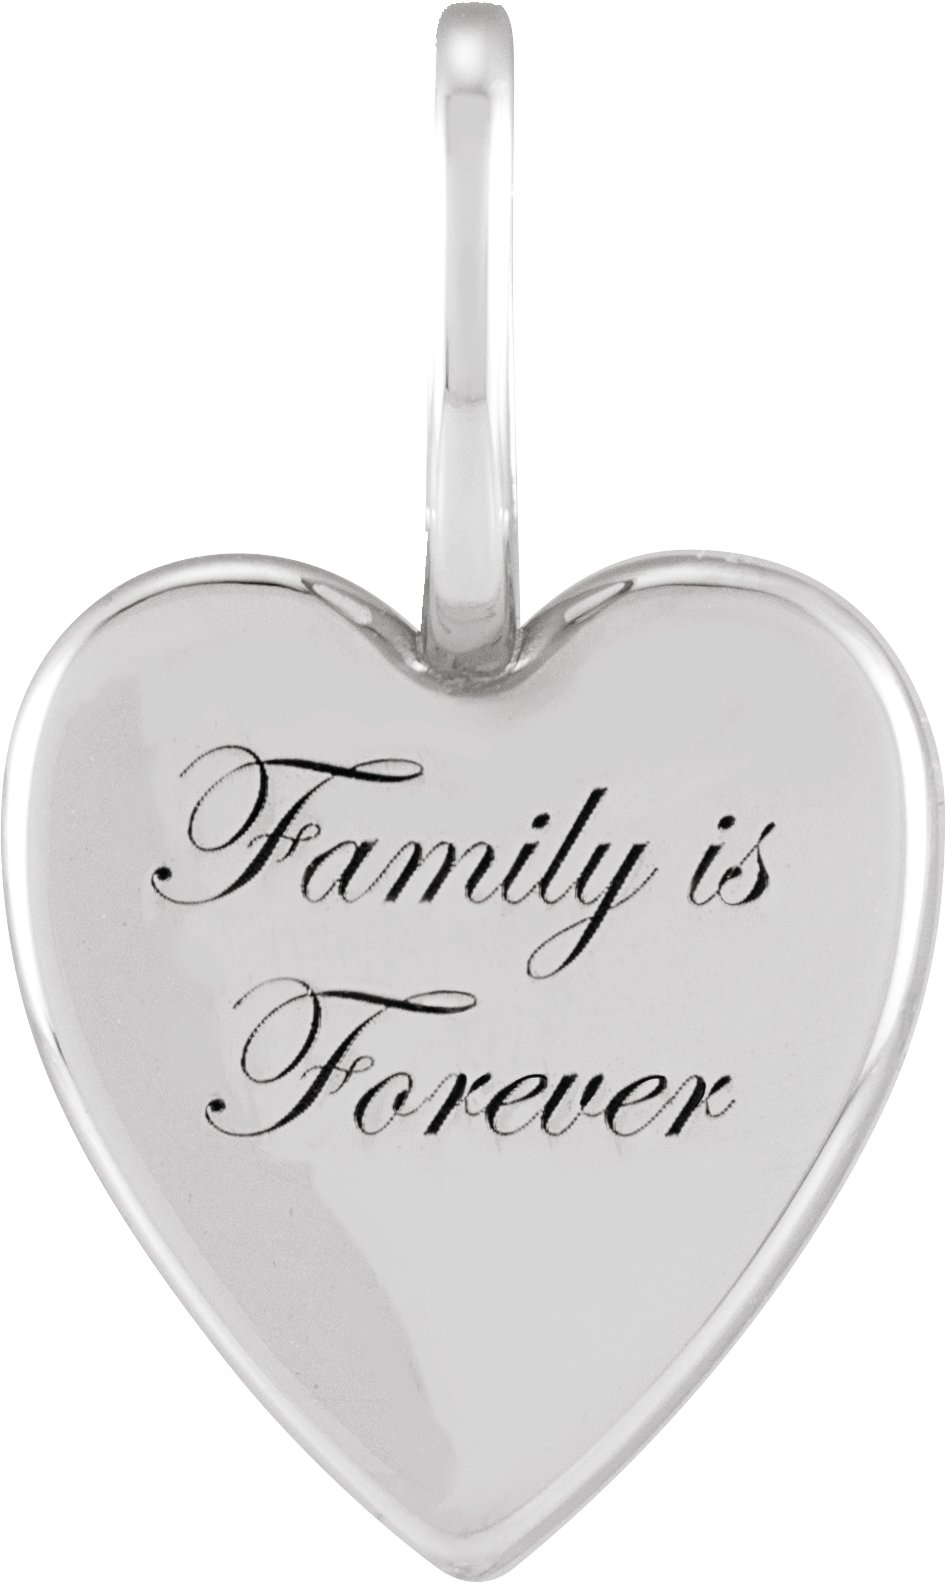 Sterling Silver Family is Forever Heart Charm/Pendant